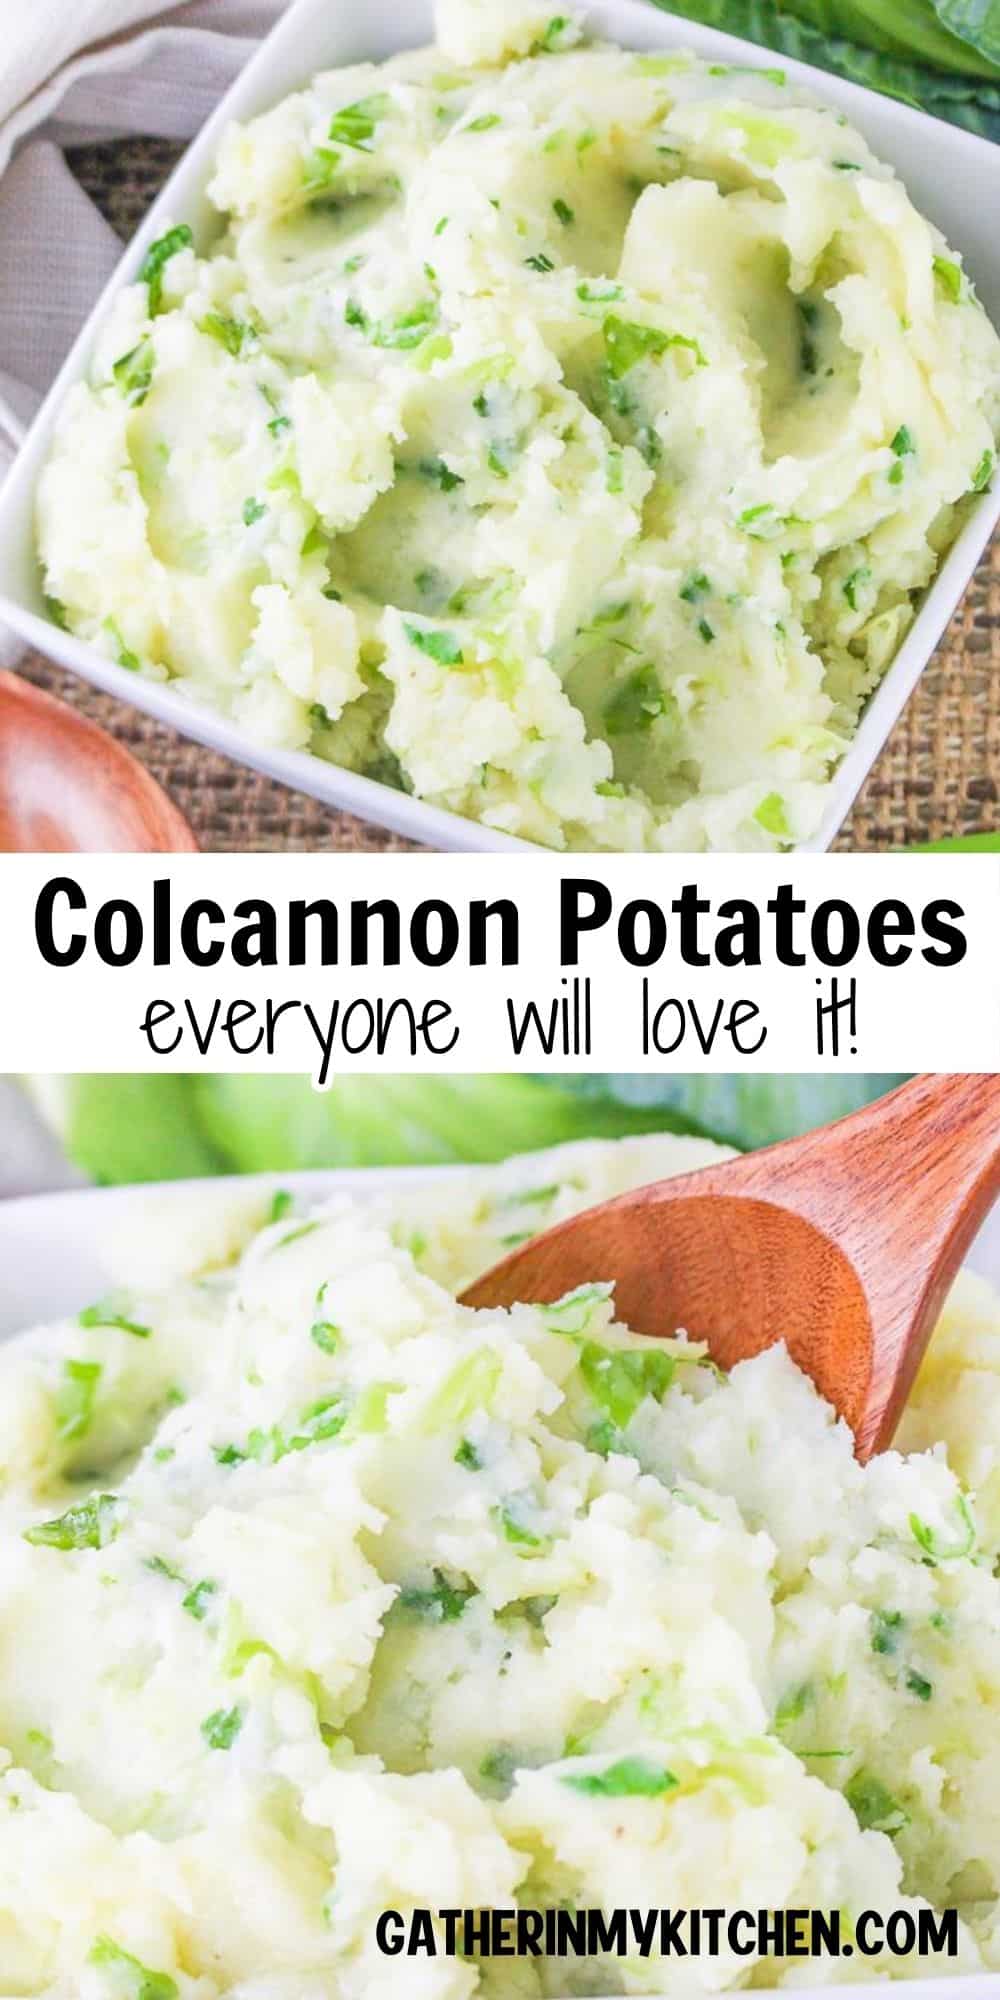 Pin Image: Top and bottom have pics of colcannon potatoes and middle says "Colcannon Potatoes everyone with love".